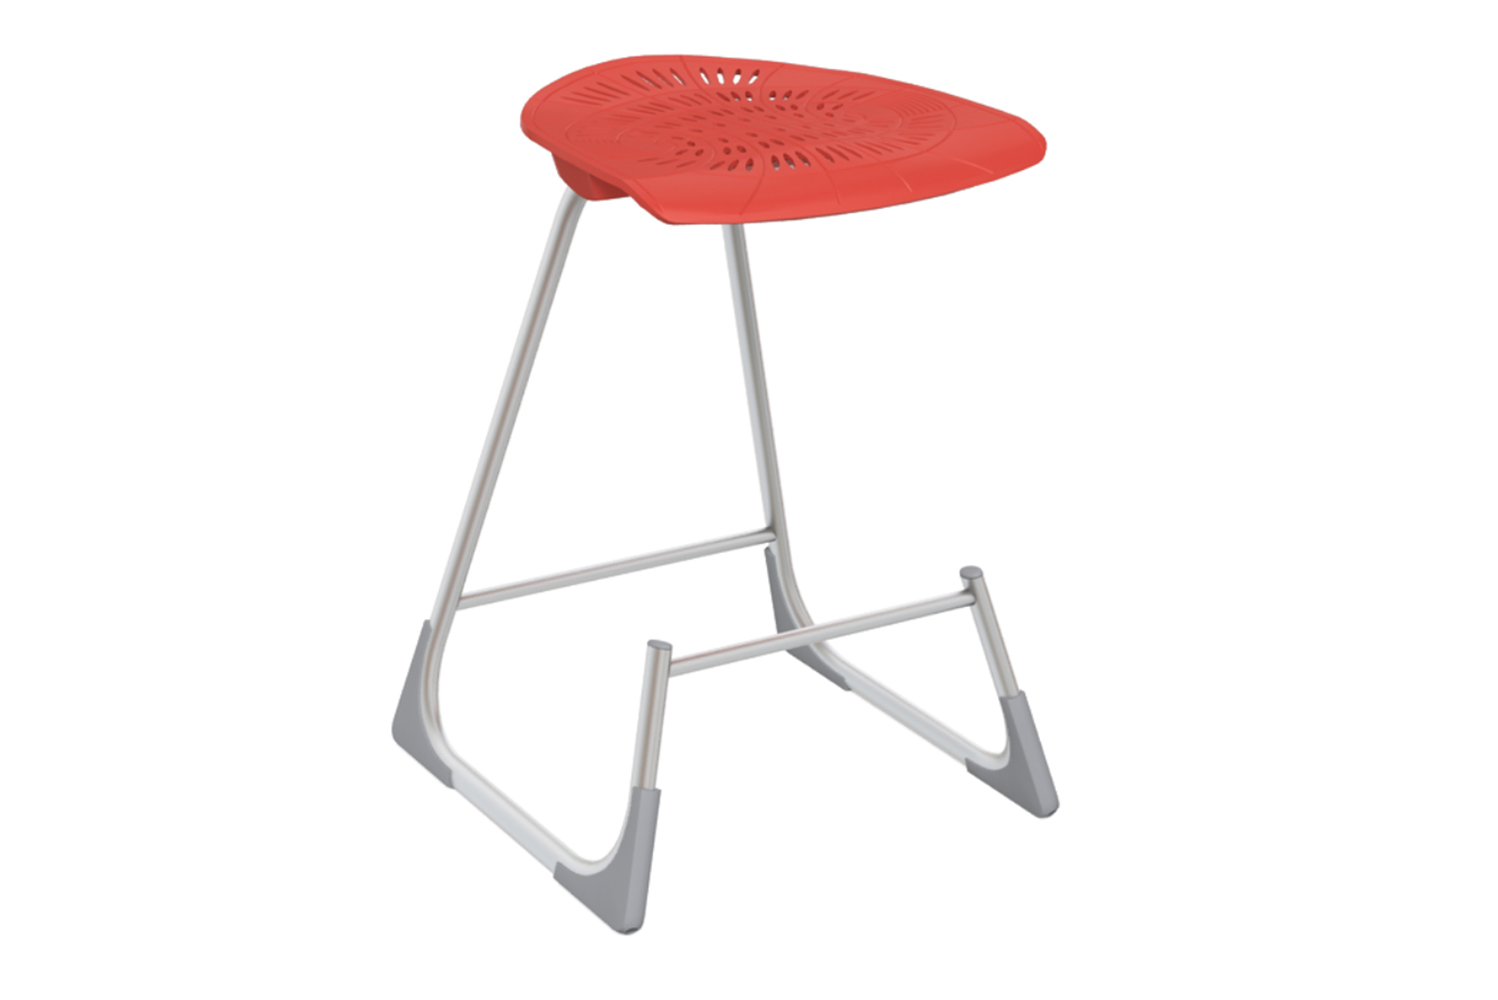 Coupled with flexible seats and foot rails the Bodyfurn lab stool can move forward or backward with a shift in weight 